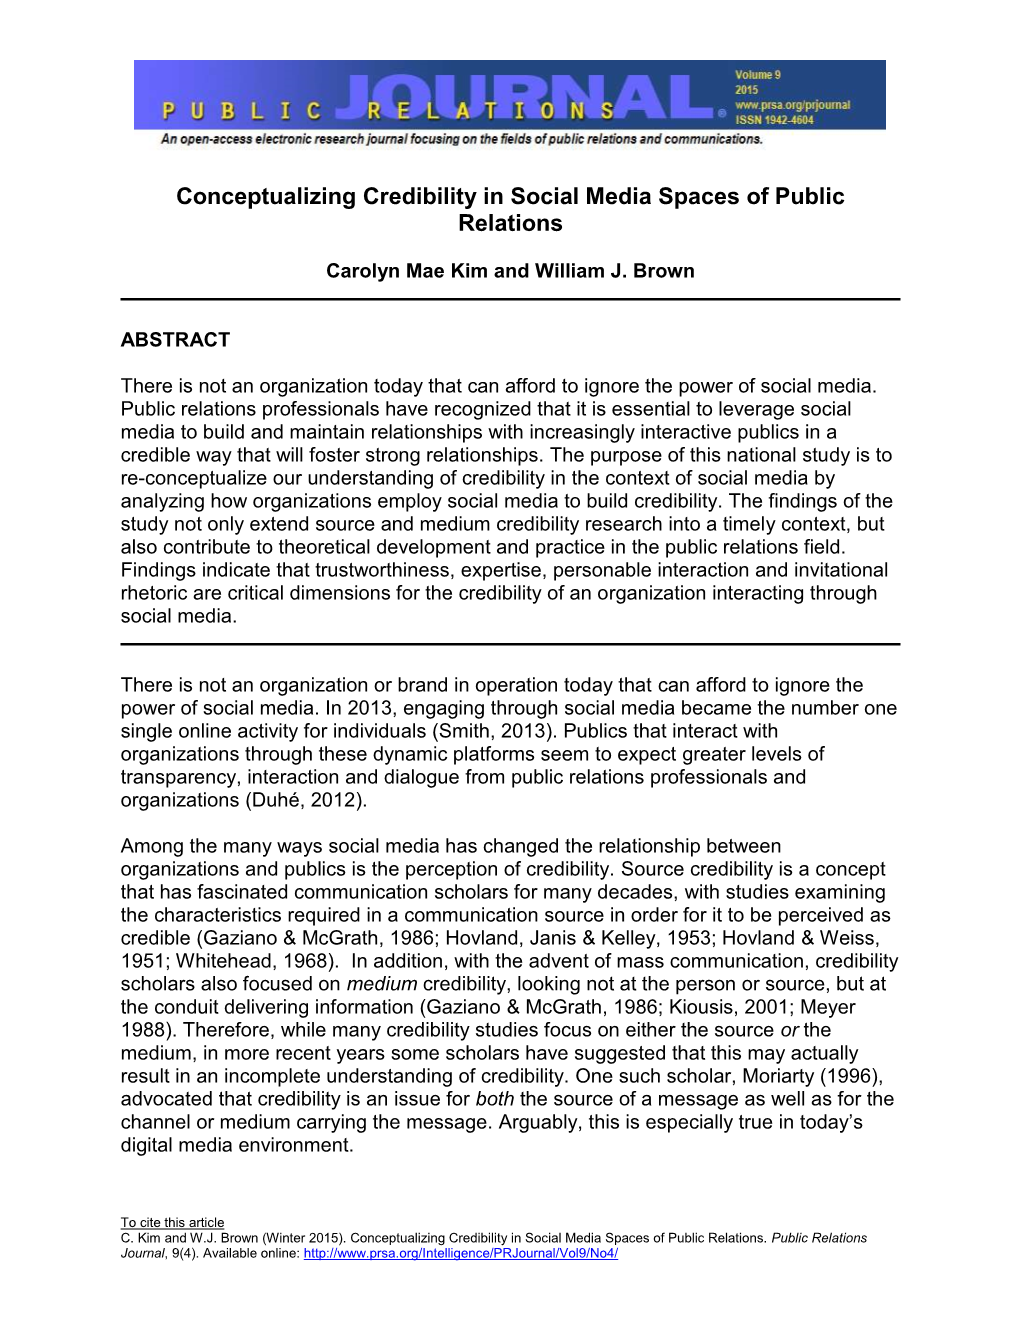 Conceptualizing Credibility in Social Media Spaces of Public Relations